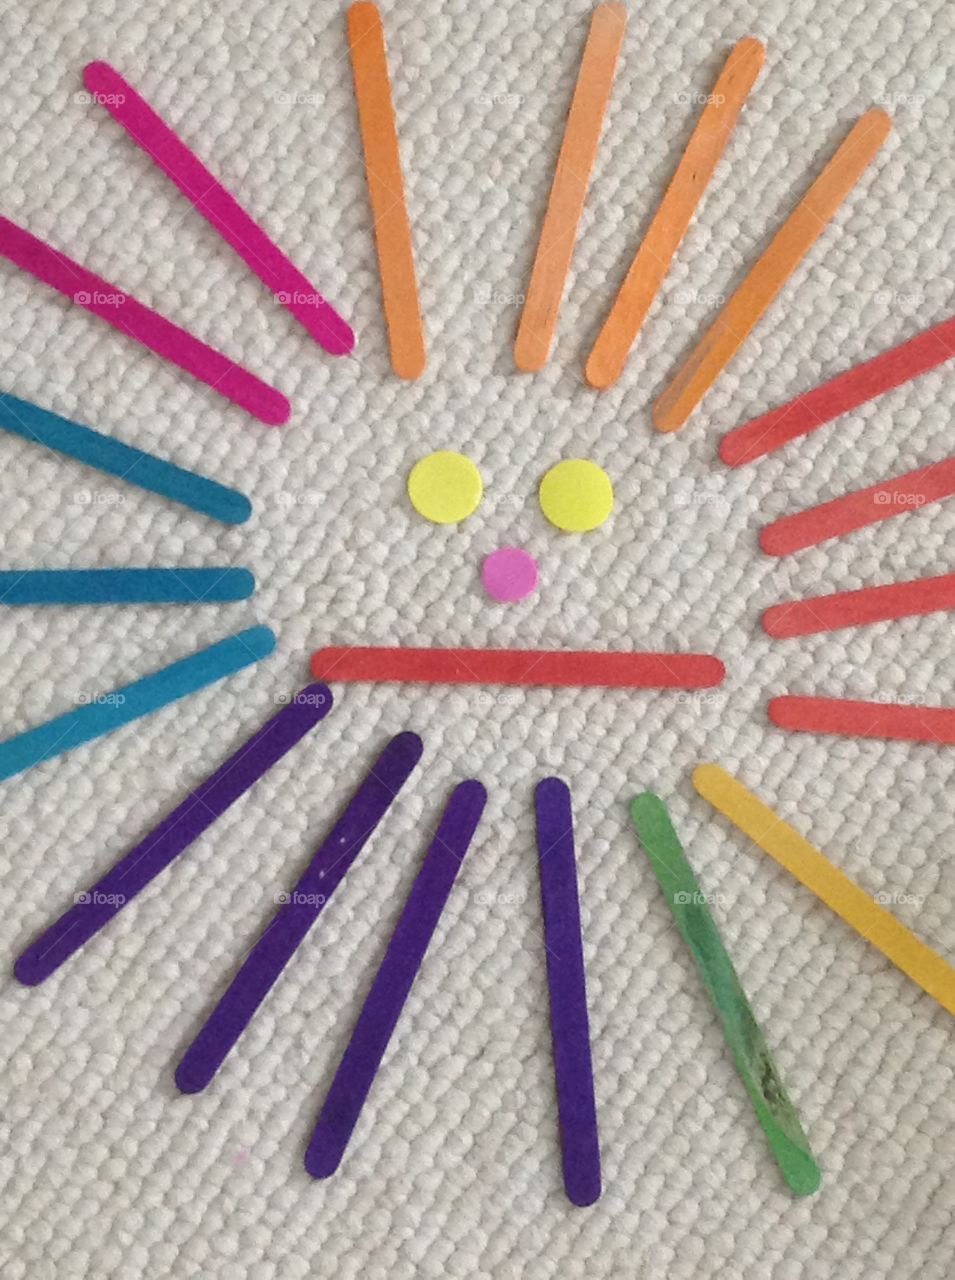 Popcicle sticks and circle stickers smiley face for arts and crafts supplies.